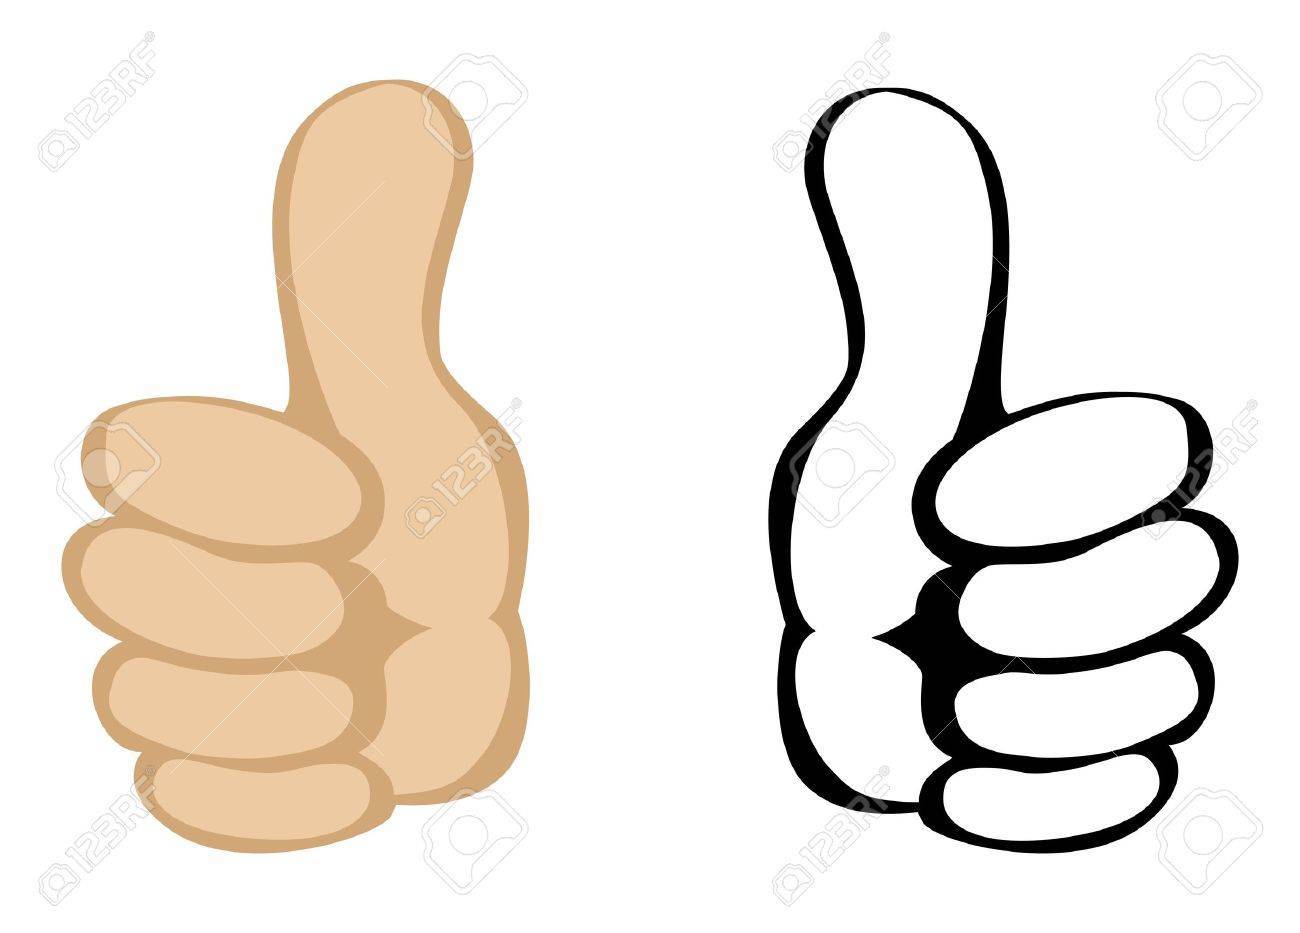 Thumbs up hand clipart